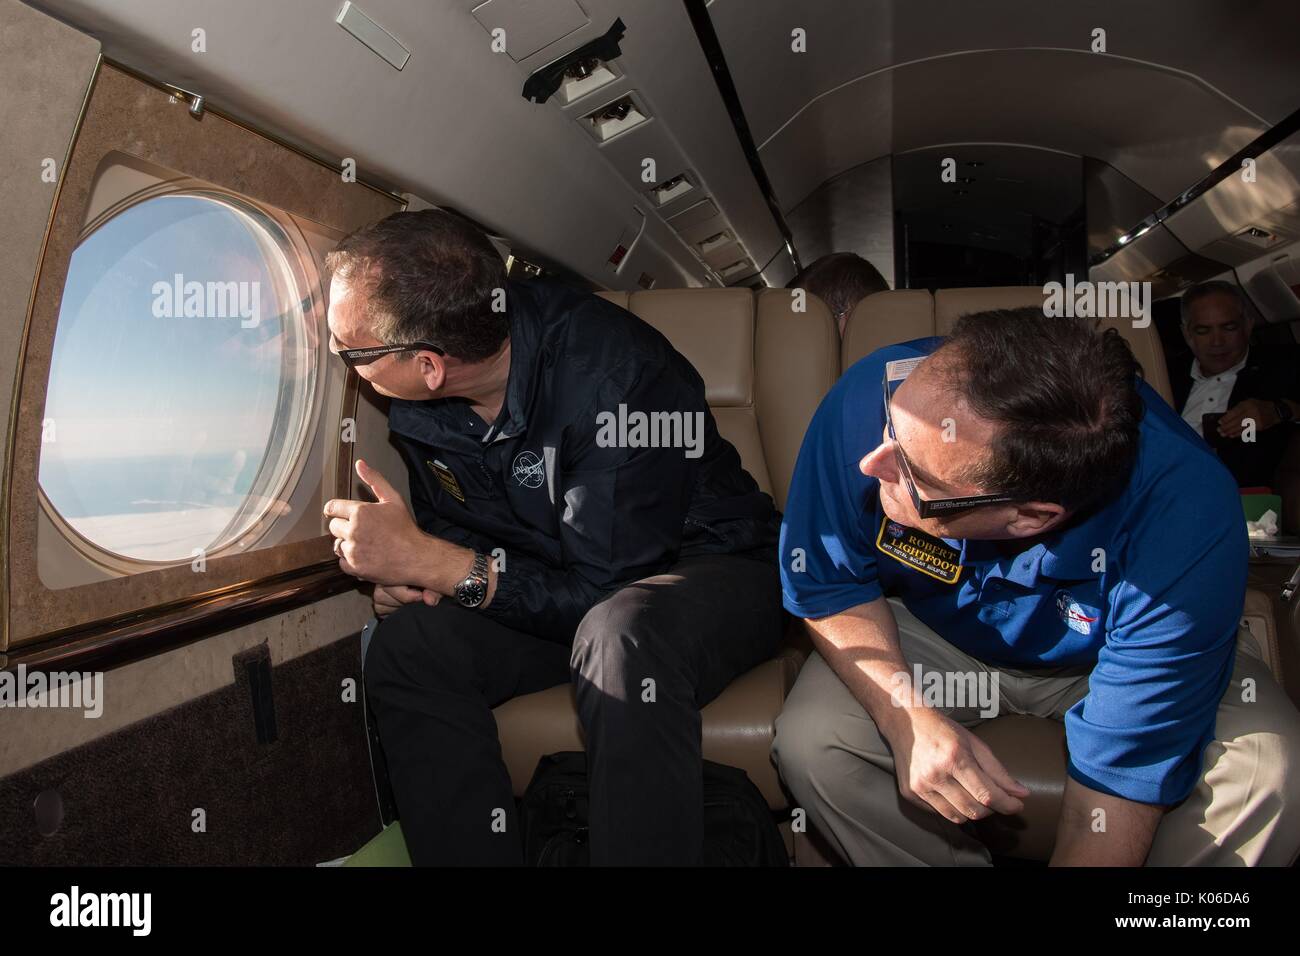 Acting NASA administrator Robert Lightfoot, right, and NASA Associate Administrator for the Science Mission Directorate Thomas Zurbuchen view the solar eclipse from onboard a NASA Armstrong Flight Research Center's Gulfstream III August 21, 2017 flying 35,000 feet above the Oregon Coast. The total eclipse swept across a narrow portion of the contiguous United States from Oregon to South Carolina and a partial solar eclipse was visible across the entire North American continent along with parts of South America, Africa, and Europe. Stock Photo